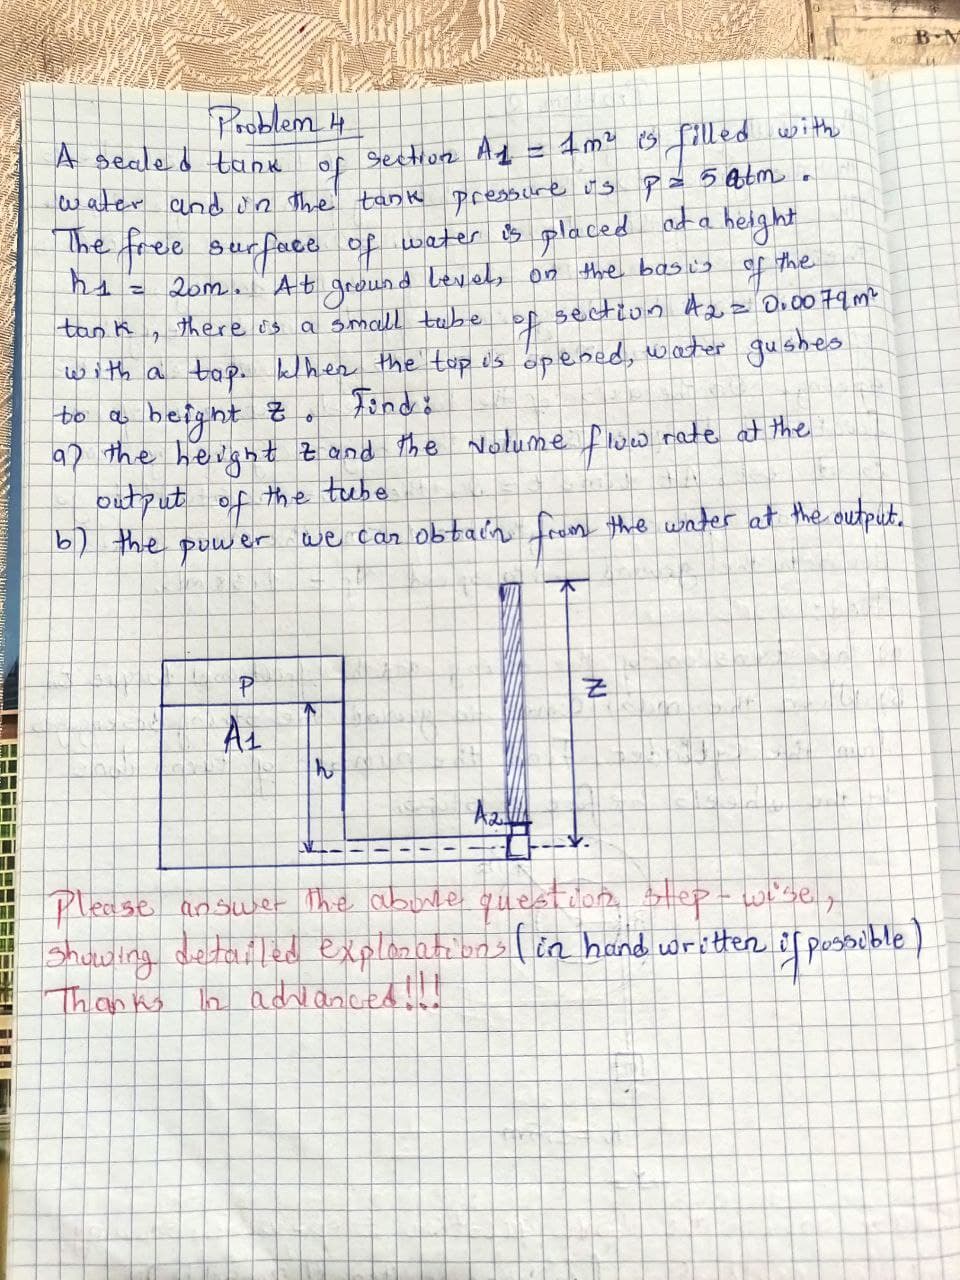 TI
T
Problem 4
A sealed tank
of Section A1.
1m² is filled with
water and in the tank pressure us p = 5 atm
The free surface of water is placed at a height
h₁ = 20m. At ground levels on the basis
the
tank
f
7
there is a small tabe of section A₂ = 0.0079m²
with a tap. khen the top is opened, water gushes
to a
beight z
0
ap the height & and the volume flow rate at the
output of the tube
ATA
by the power we car obtain from the water at the output.
18
A
A₁
POS
2
T
NJ
da
V.
Te
n
Azza
Please answer the above question step-wise,
Showing detailed explorations (in hand written if possible)
In adrlanced !!!
Thanks